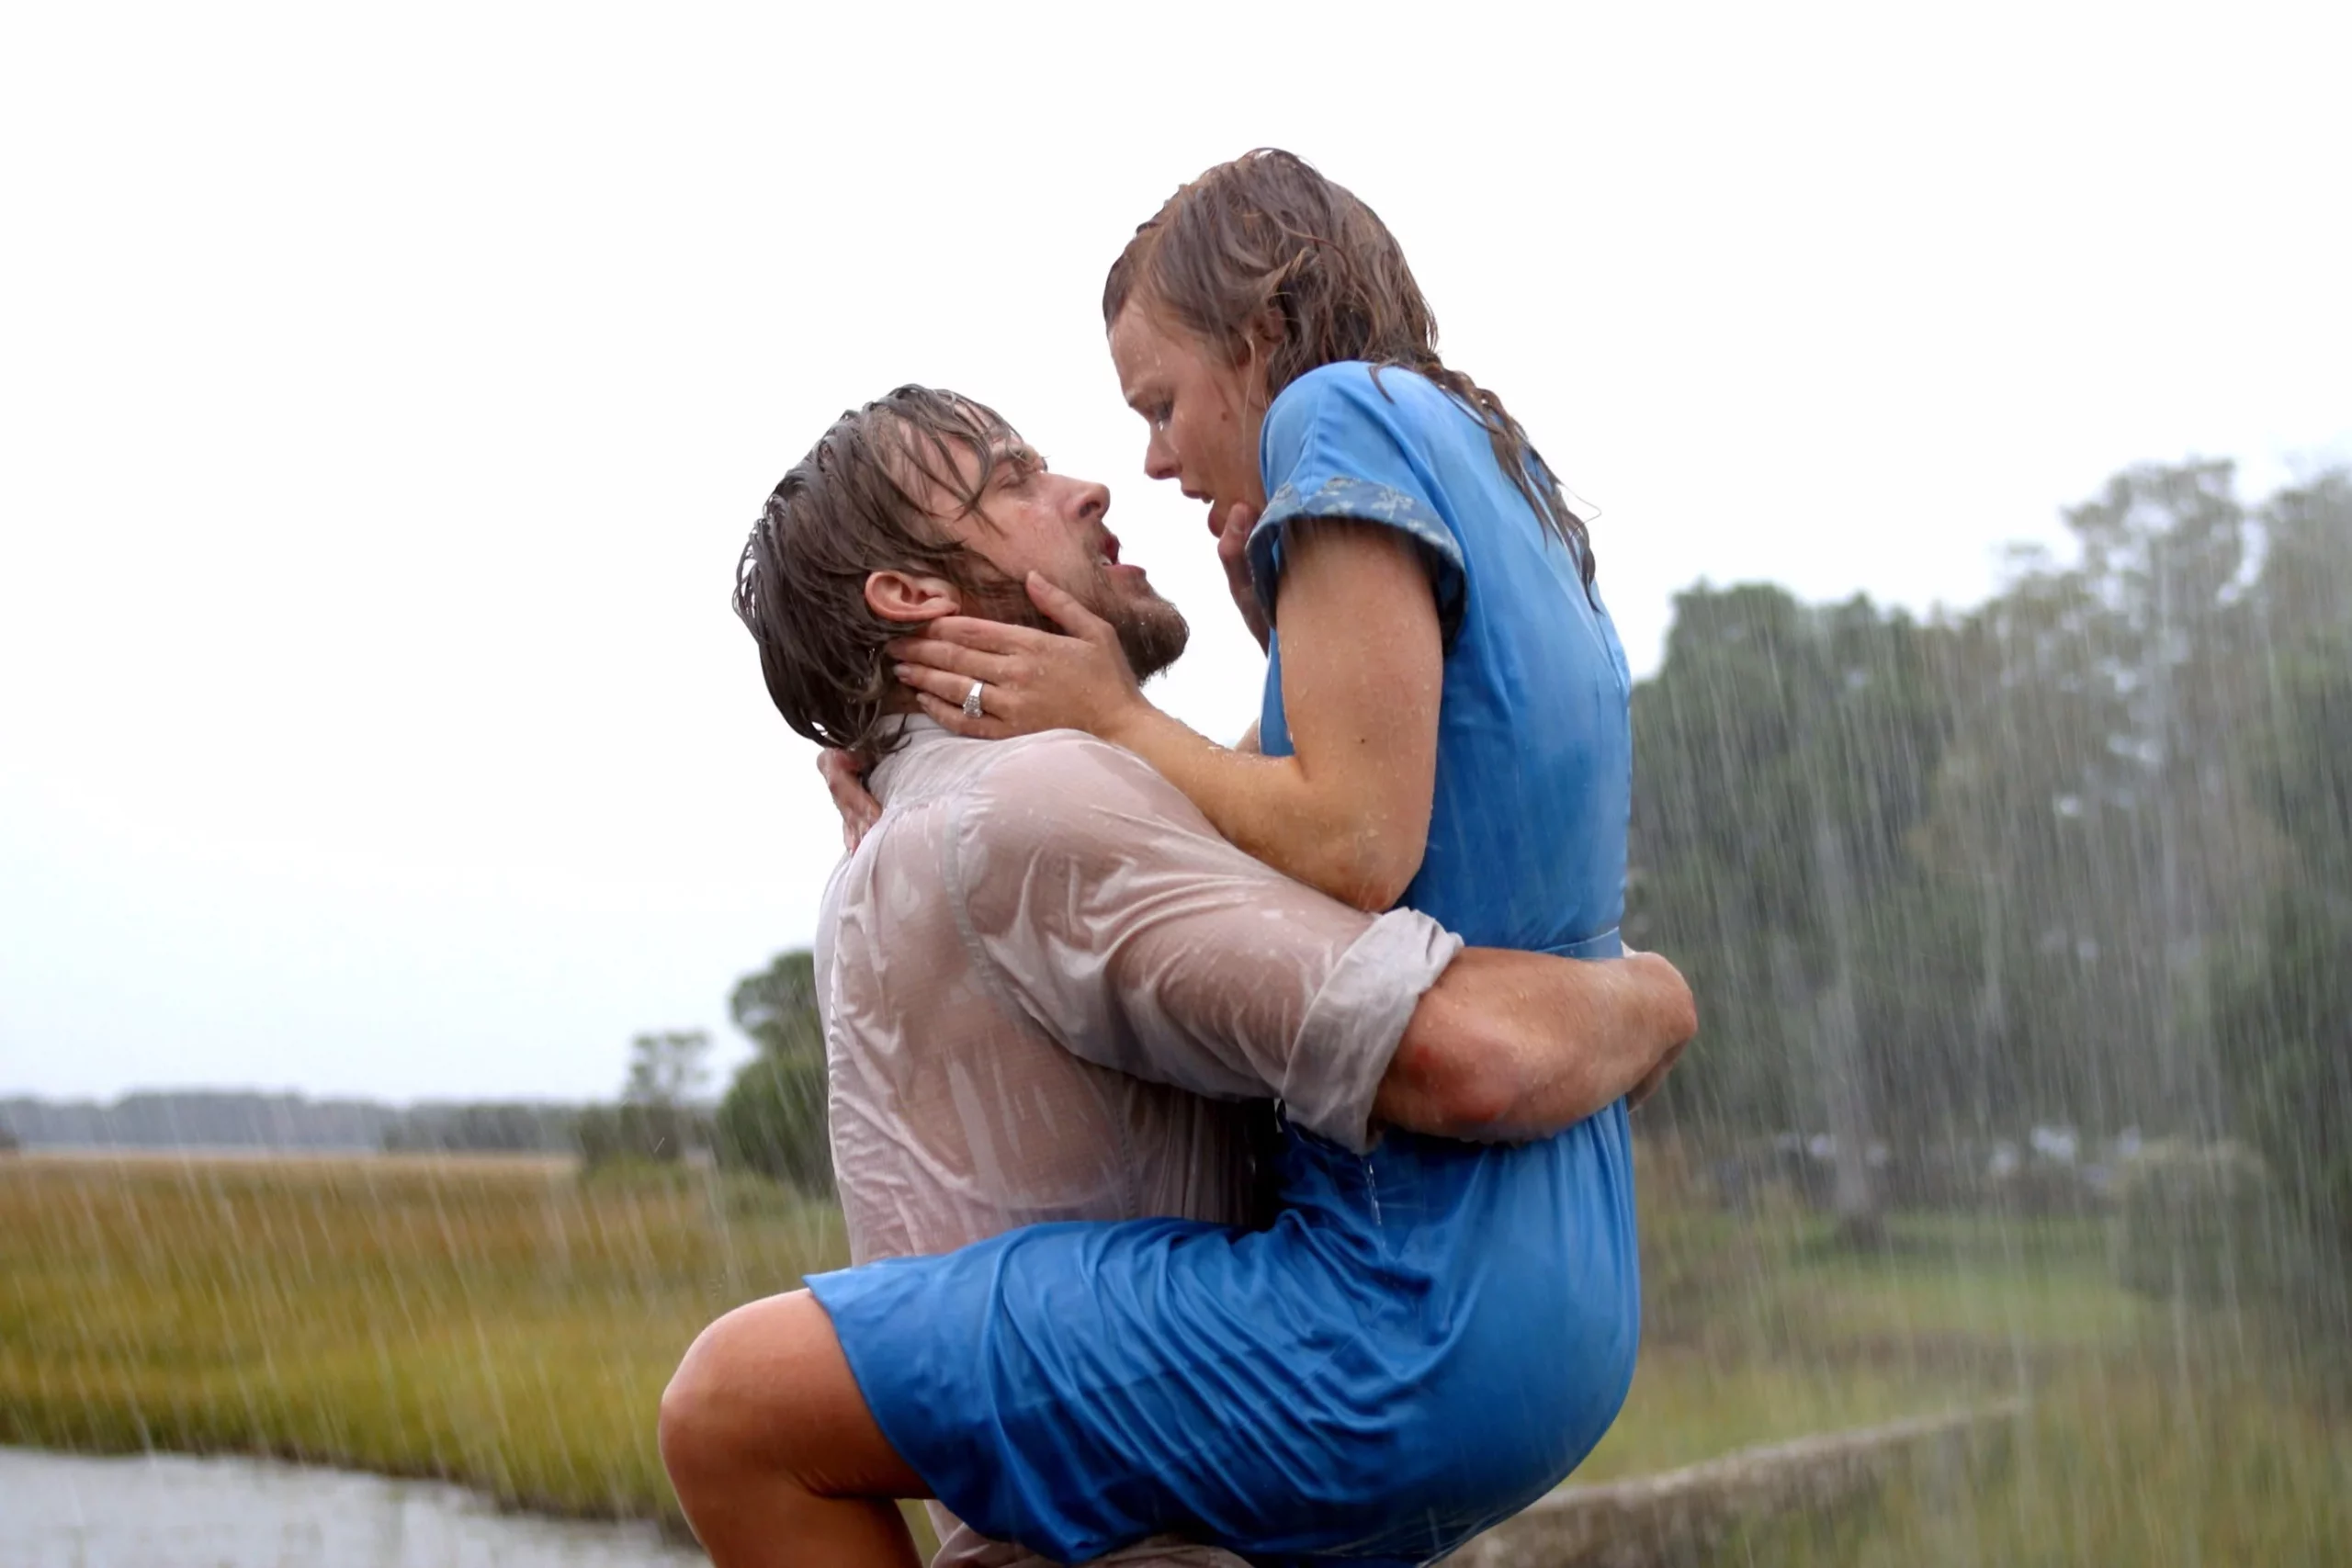 The Best Romantic Scenes in Movies That Make Our Hearts Flutter